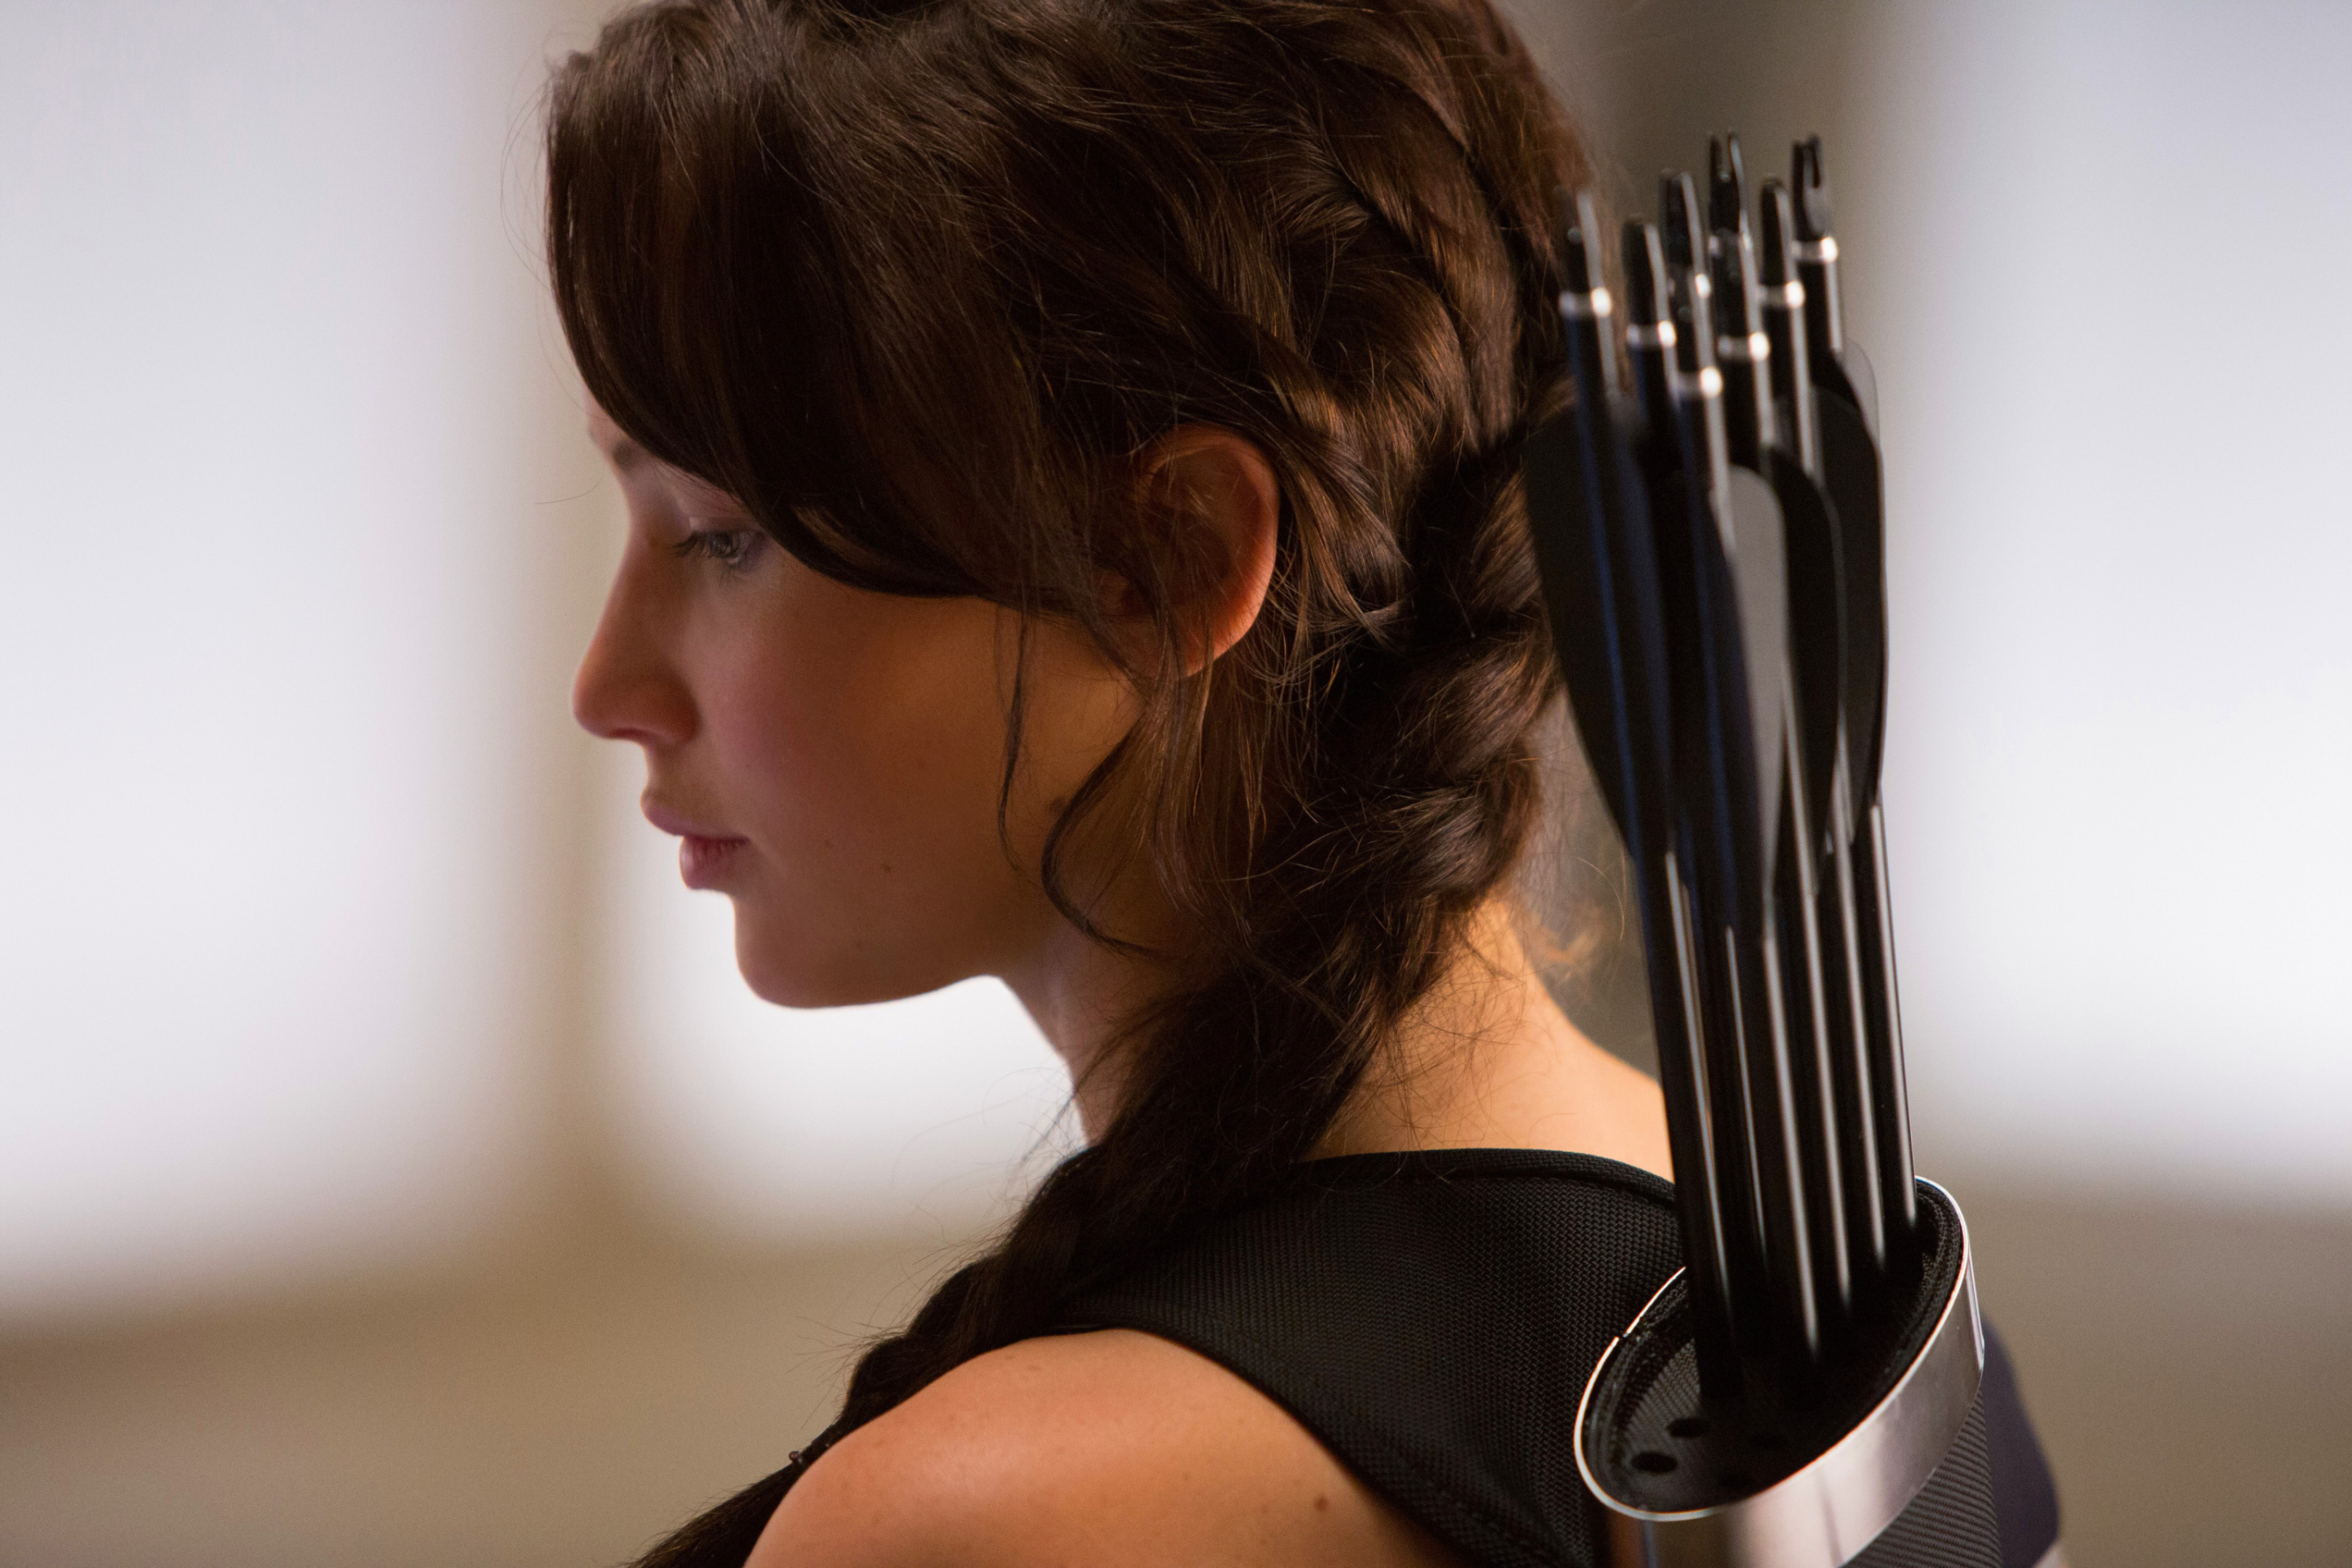 Jennifer lawrence in The Hunger Games Catching Fire wallpaper 2880x1920